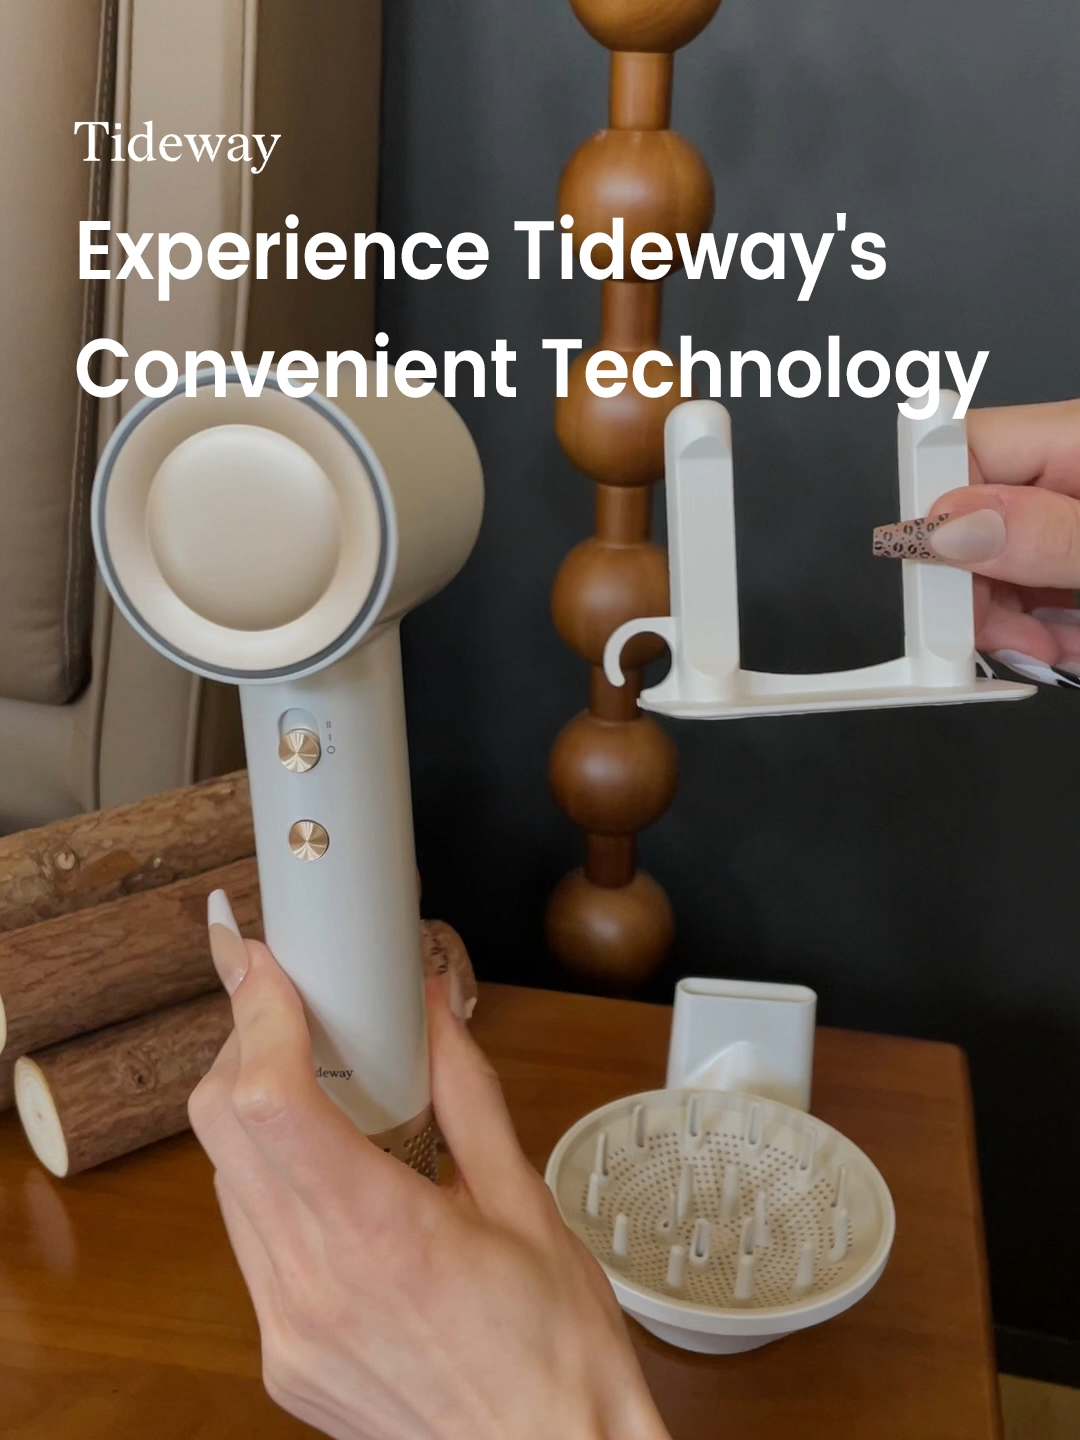 Get Salon-Quality Hair at Home with Tideway: Now Only $49.9 on Brand Day! #Tideway #hairdryer